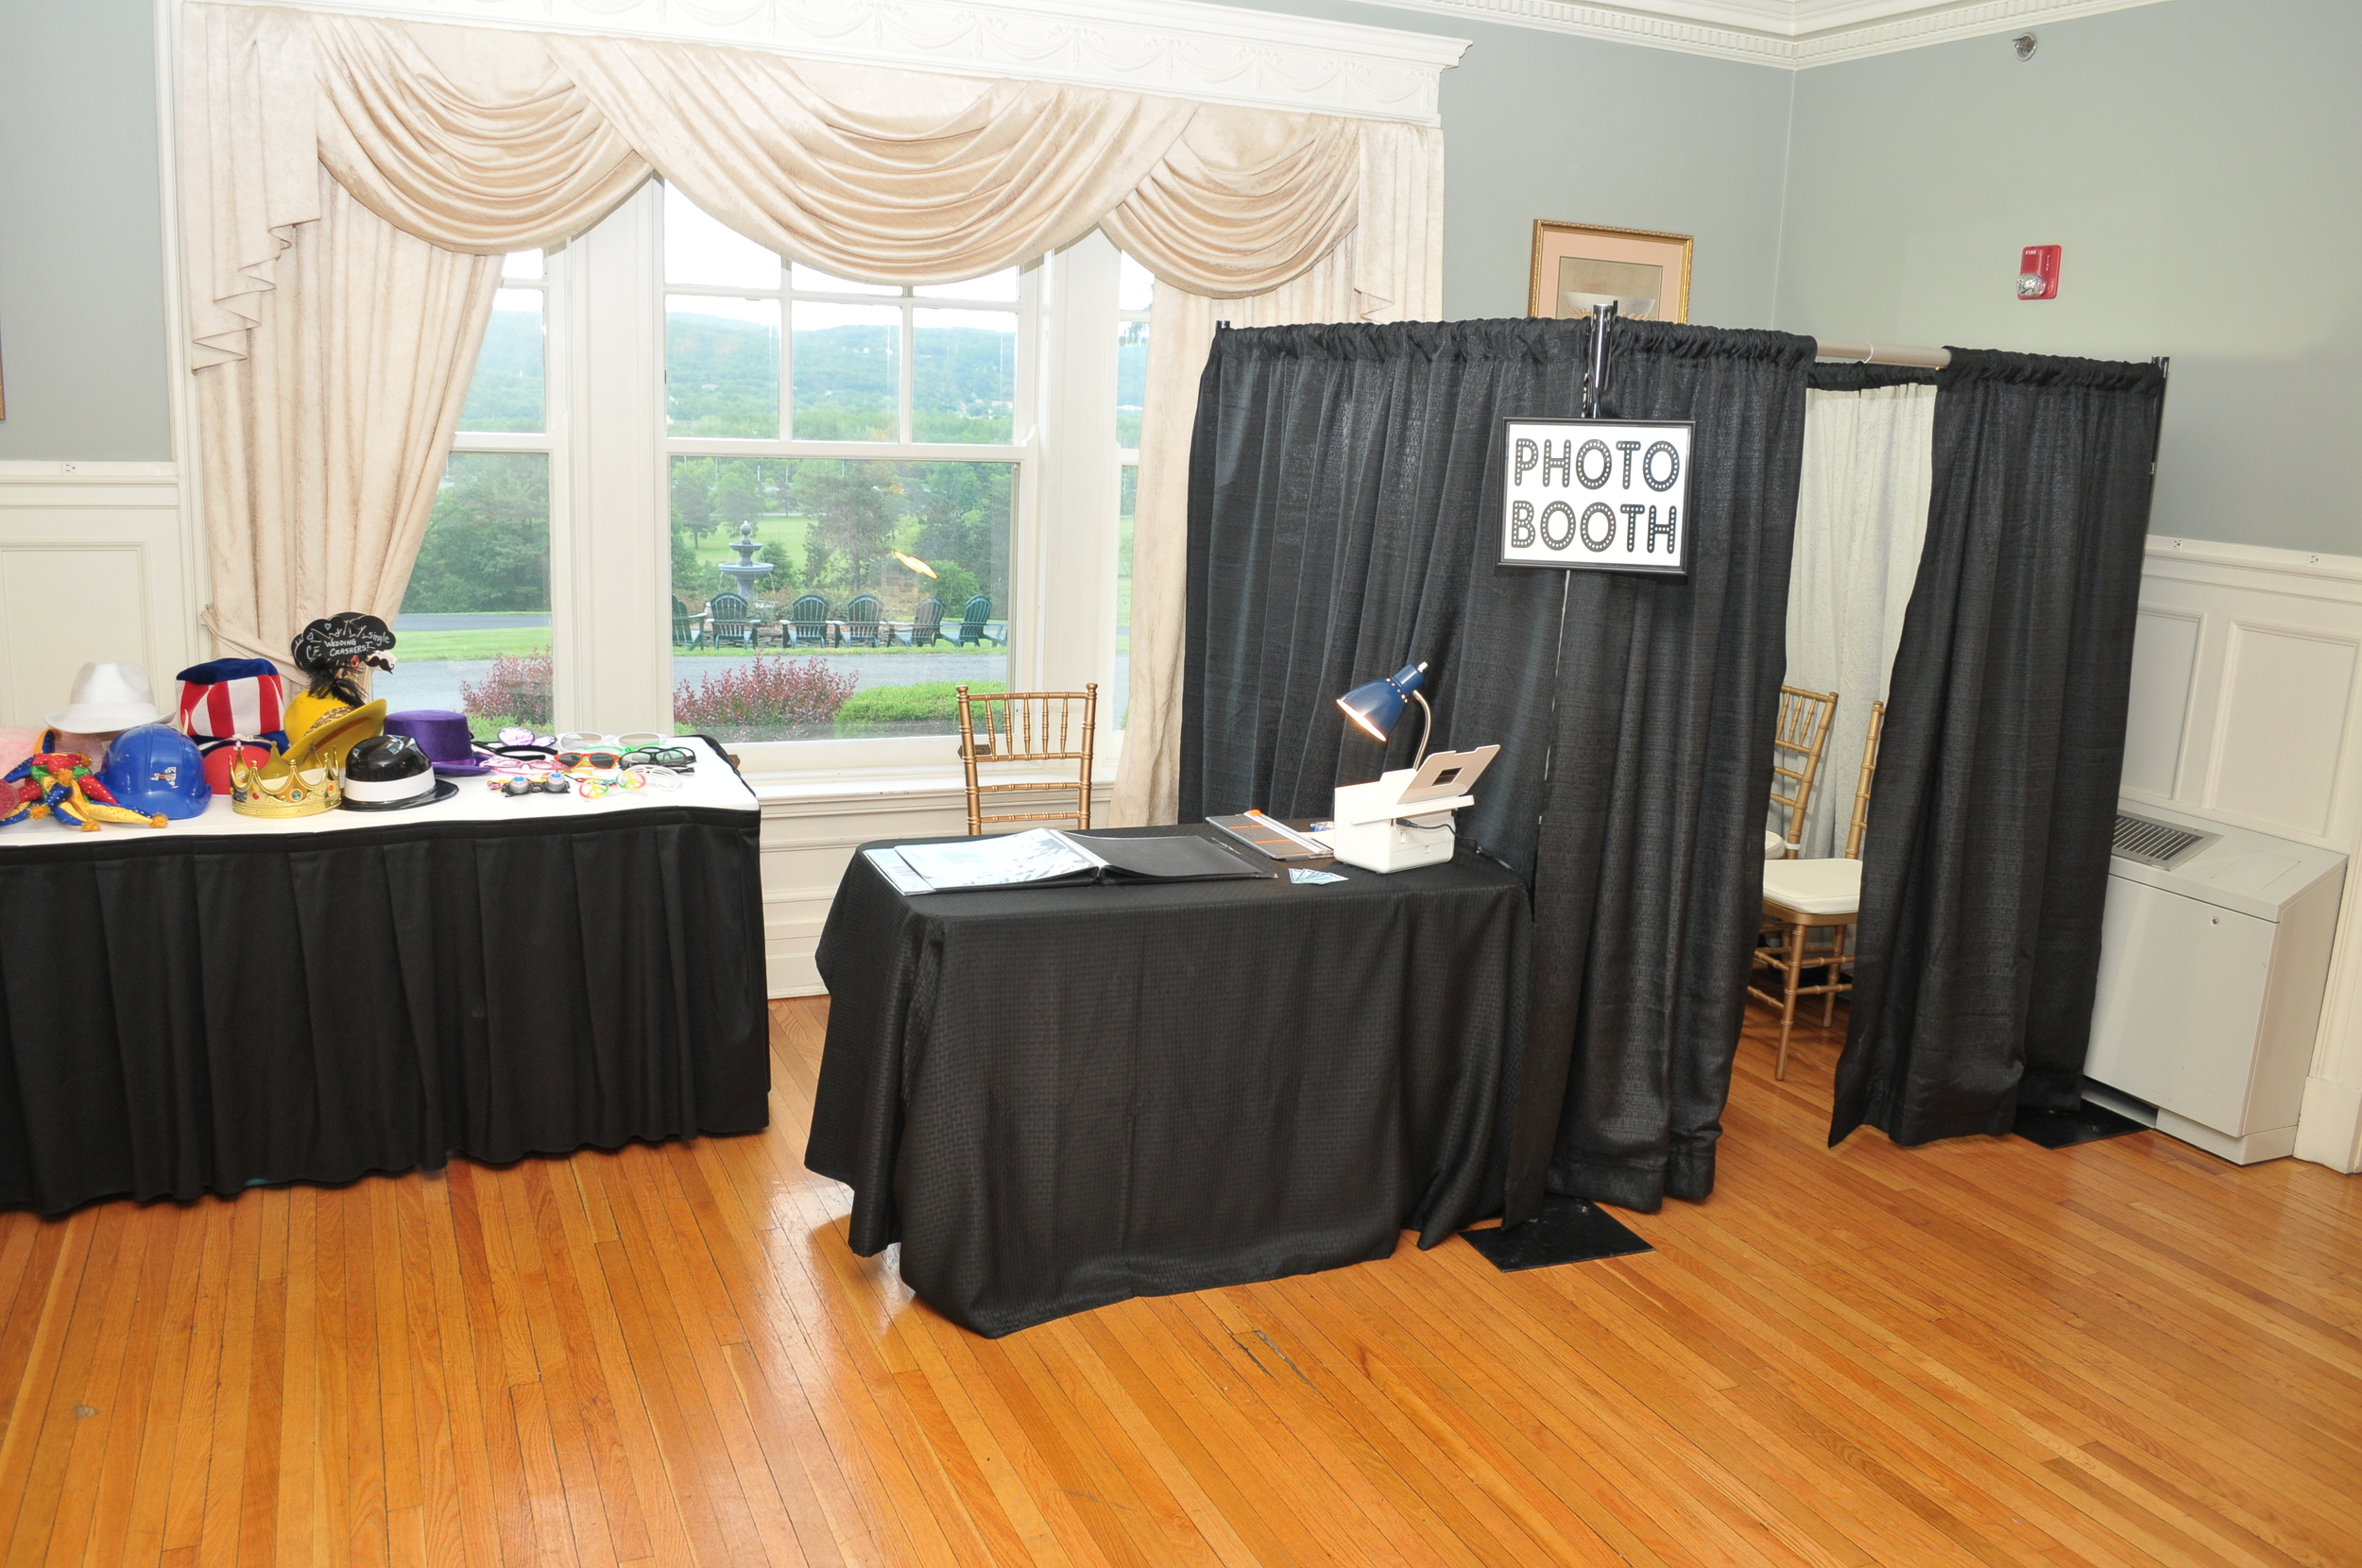  Our Booth ready for a reception at Traditions at the Glen 